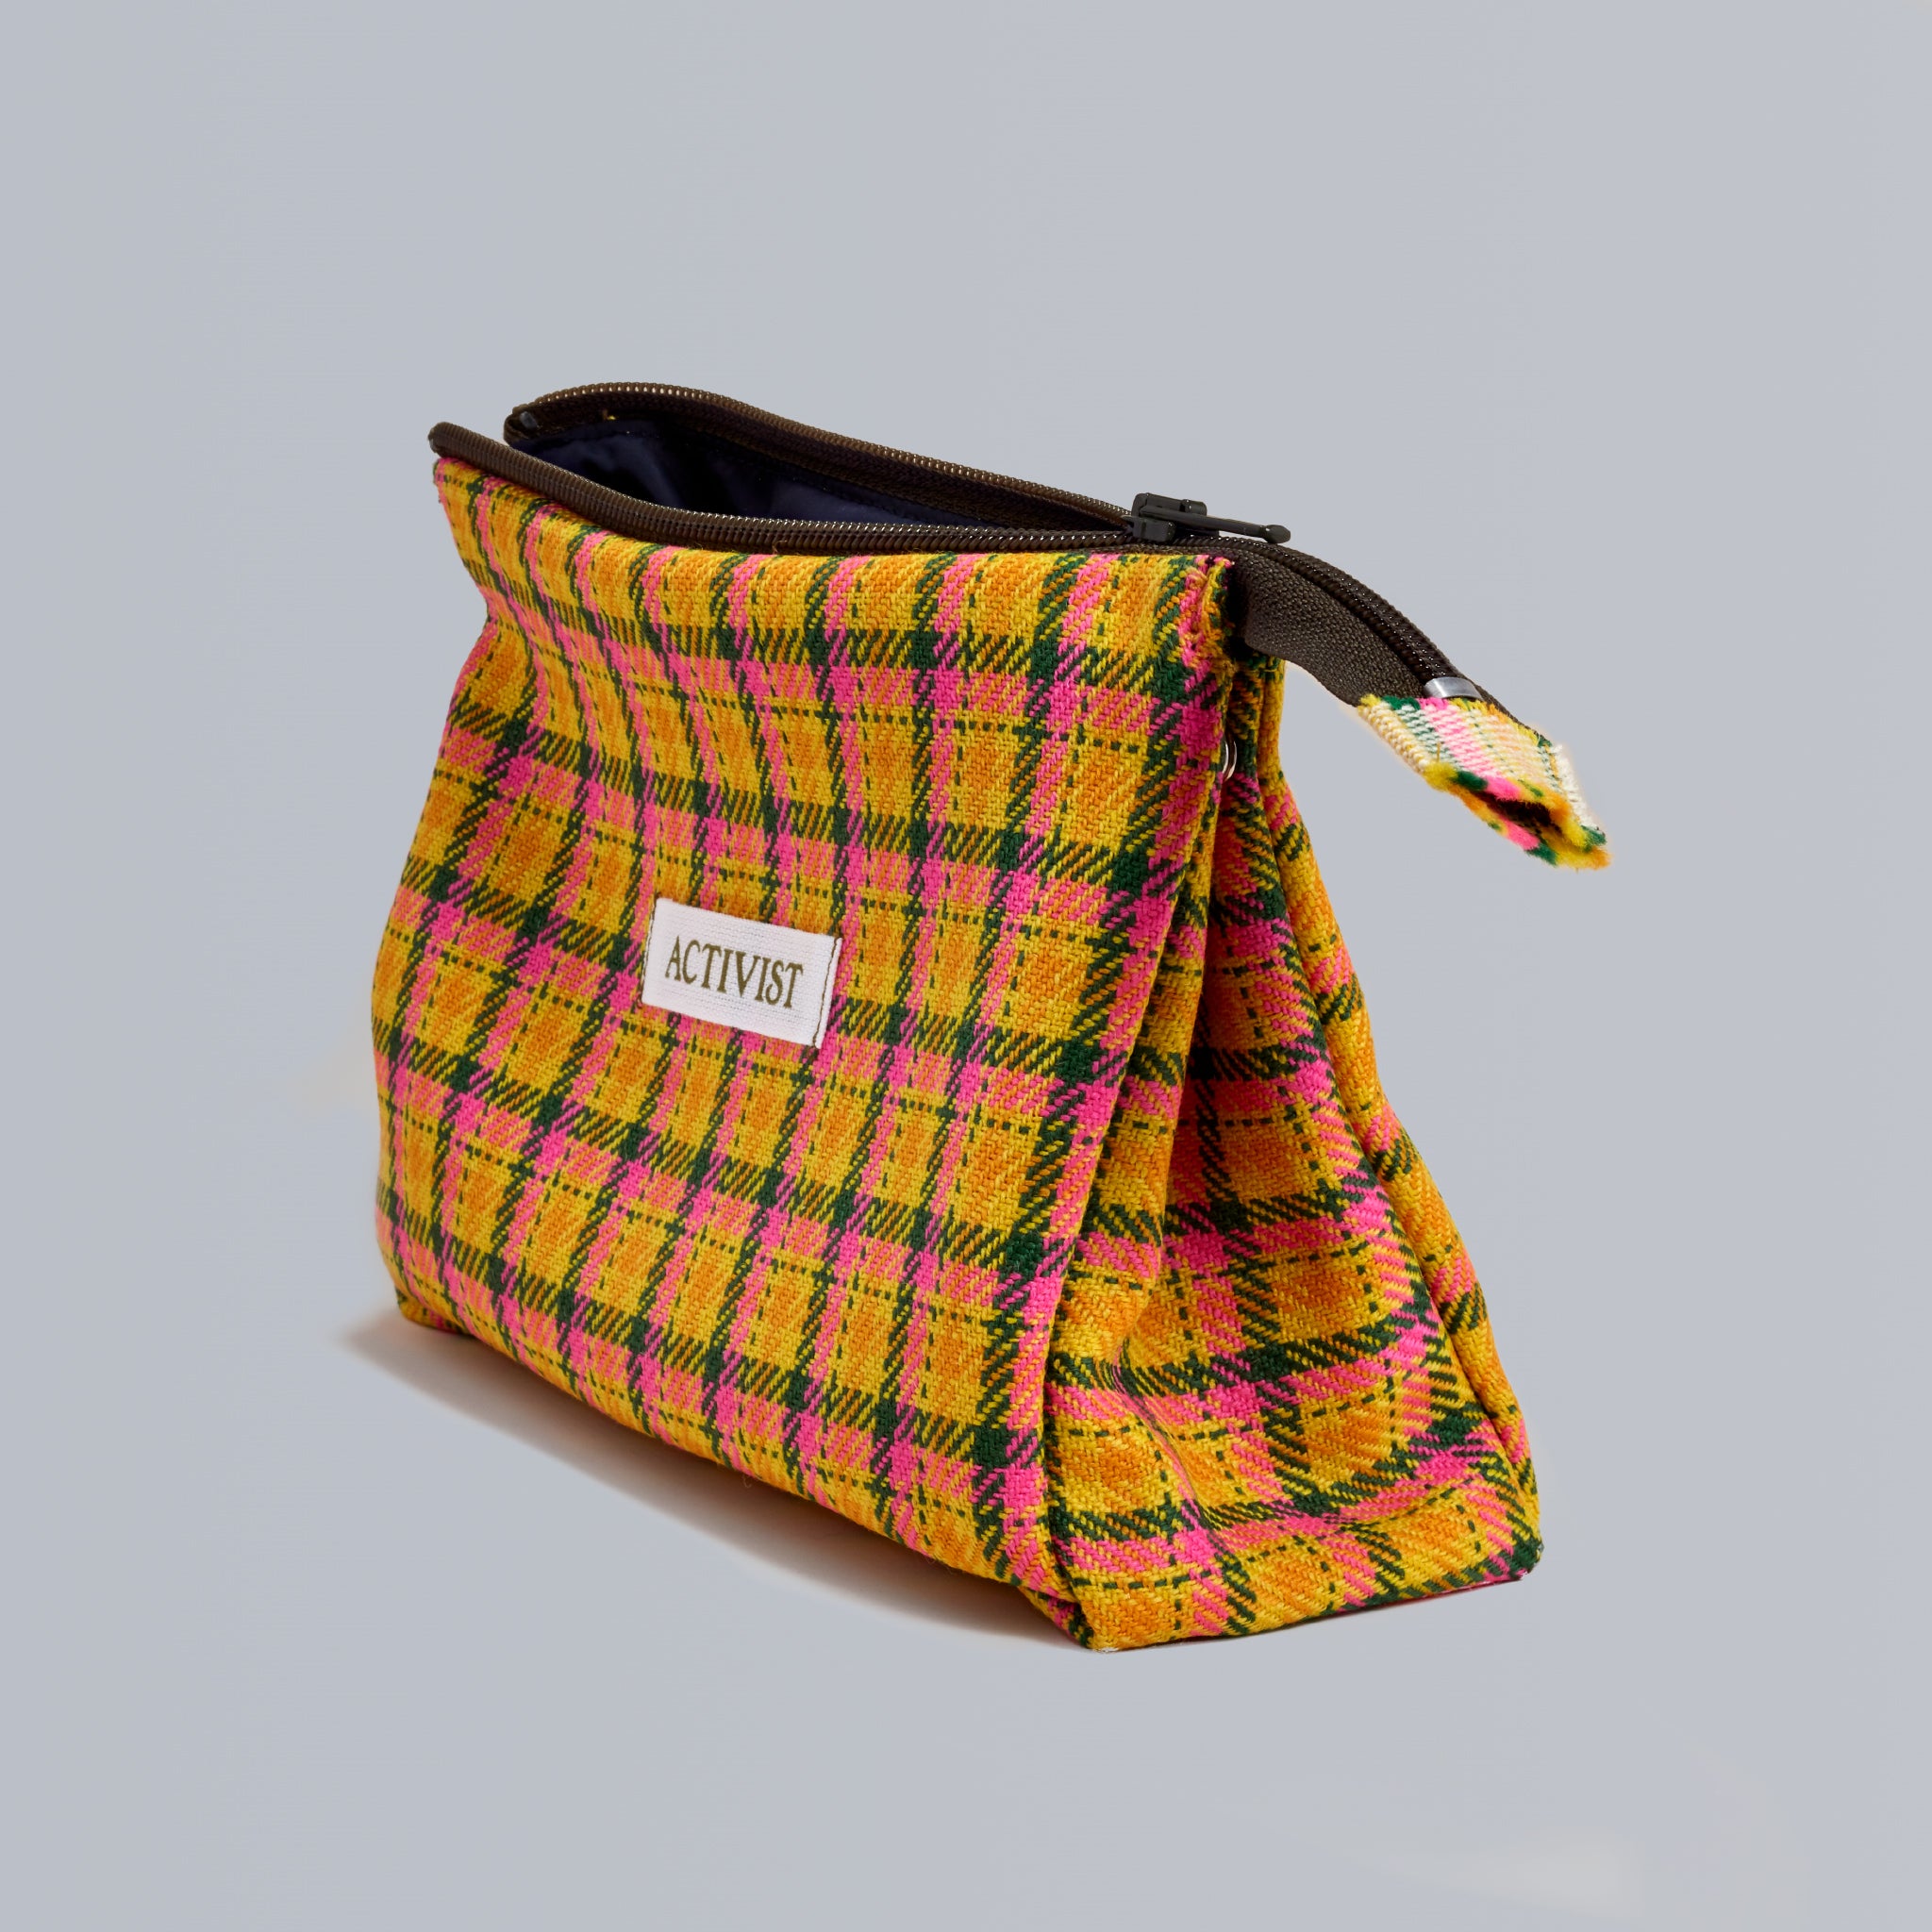 Handcrafted Toiletry Bag, Made in Italy